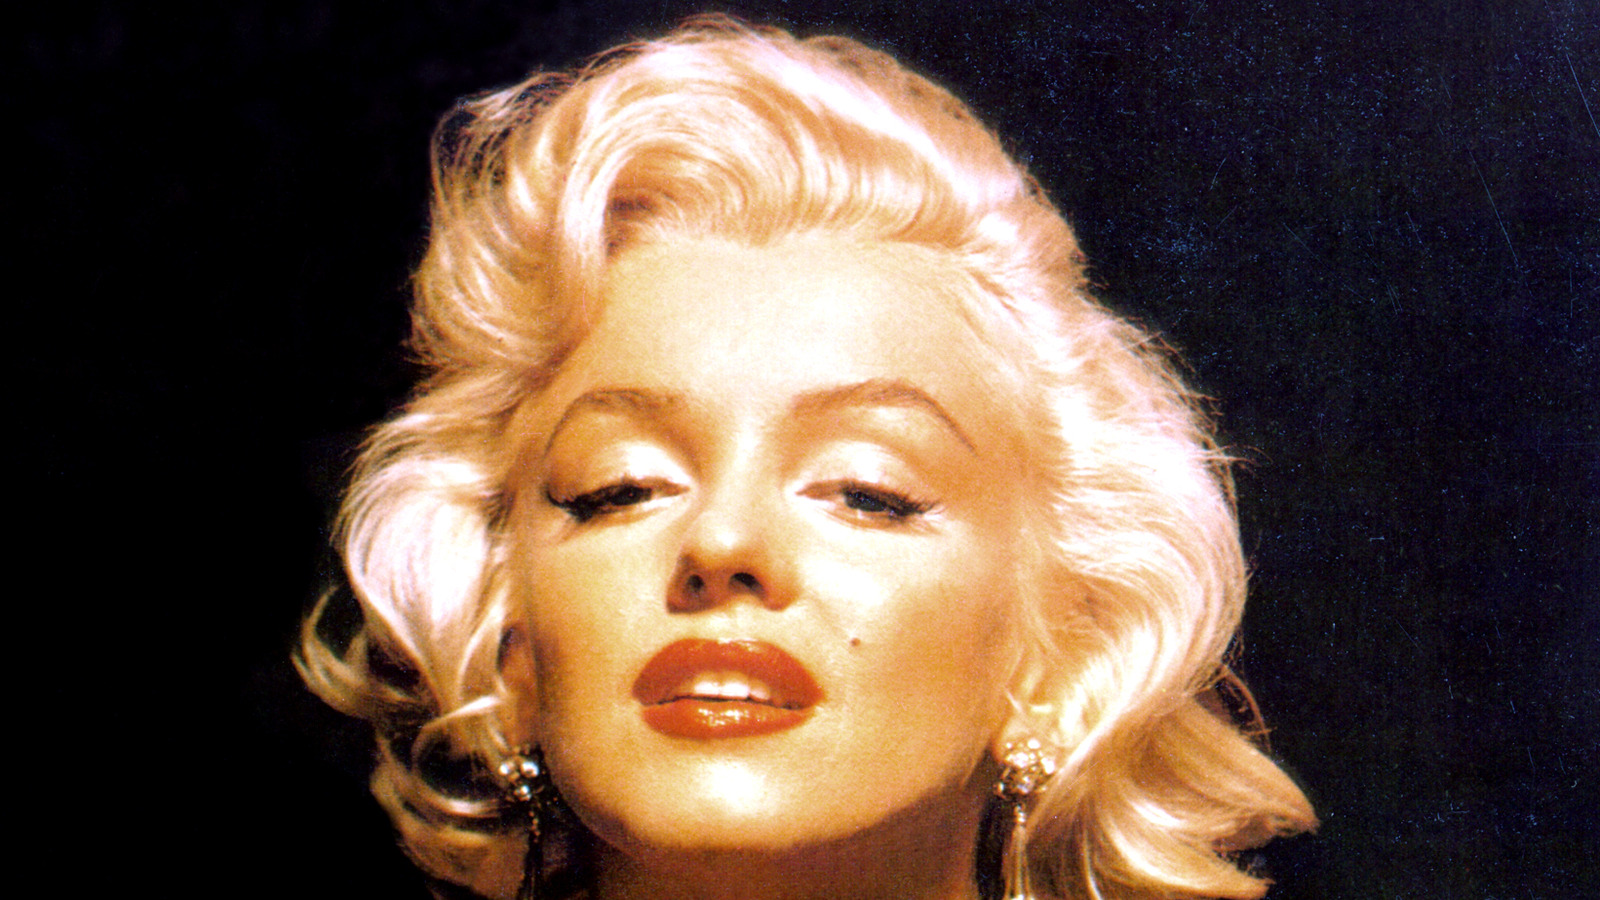 Frank Sinatra's Friend Makes Bold Claim About Marilyn And JFK